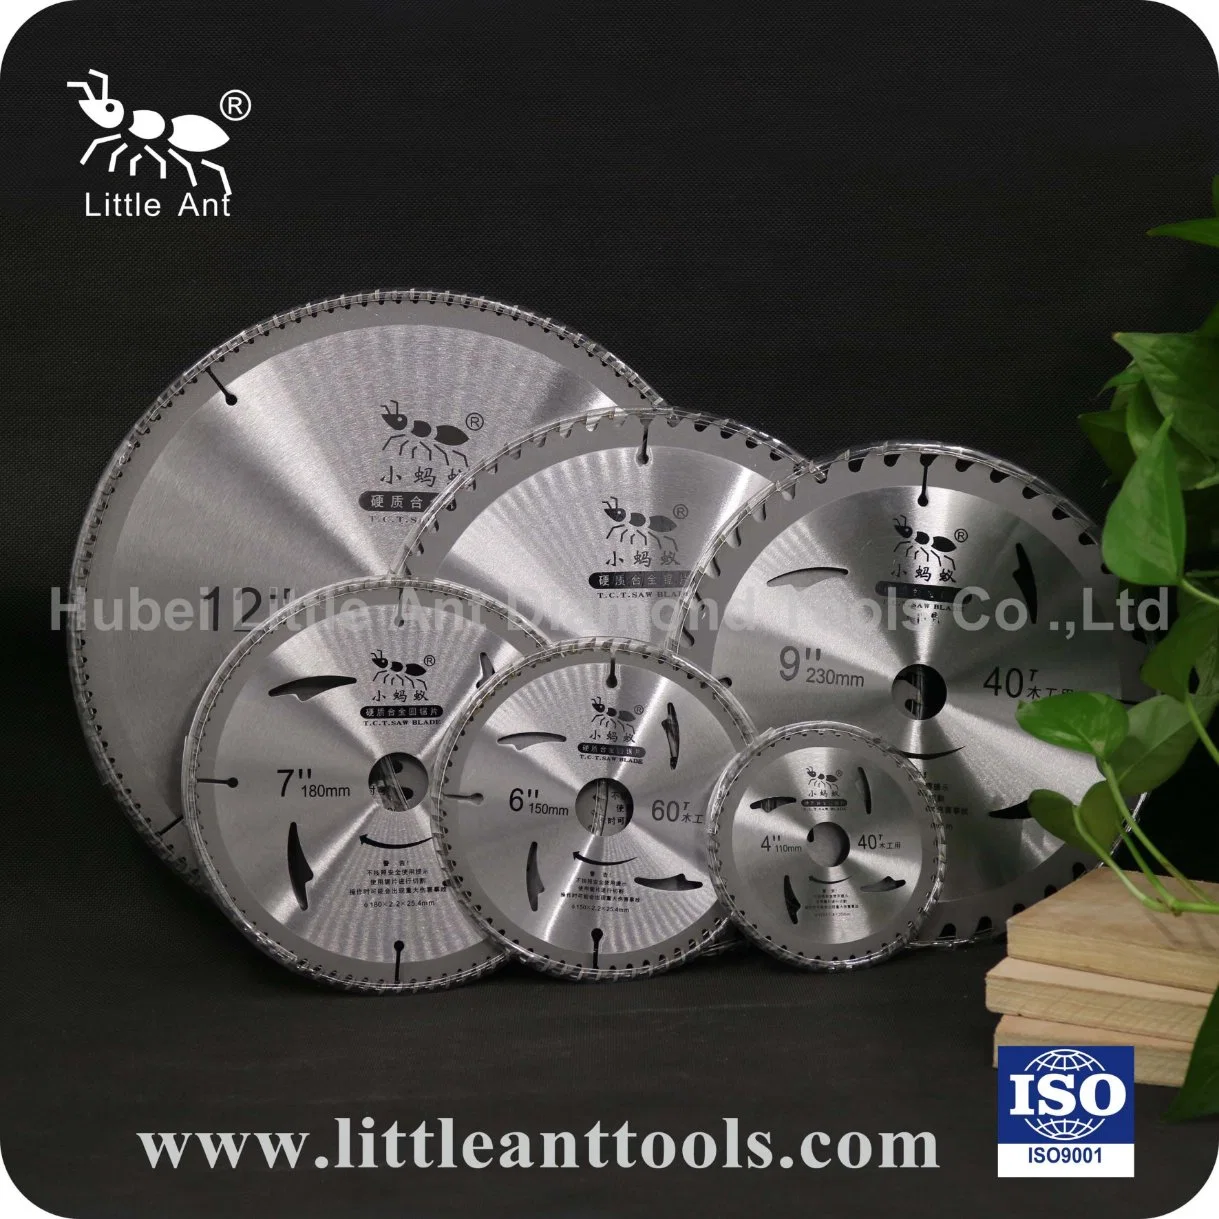 Tct Round Saw Blade for Grass